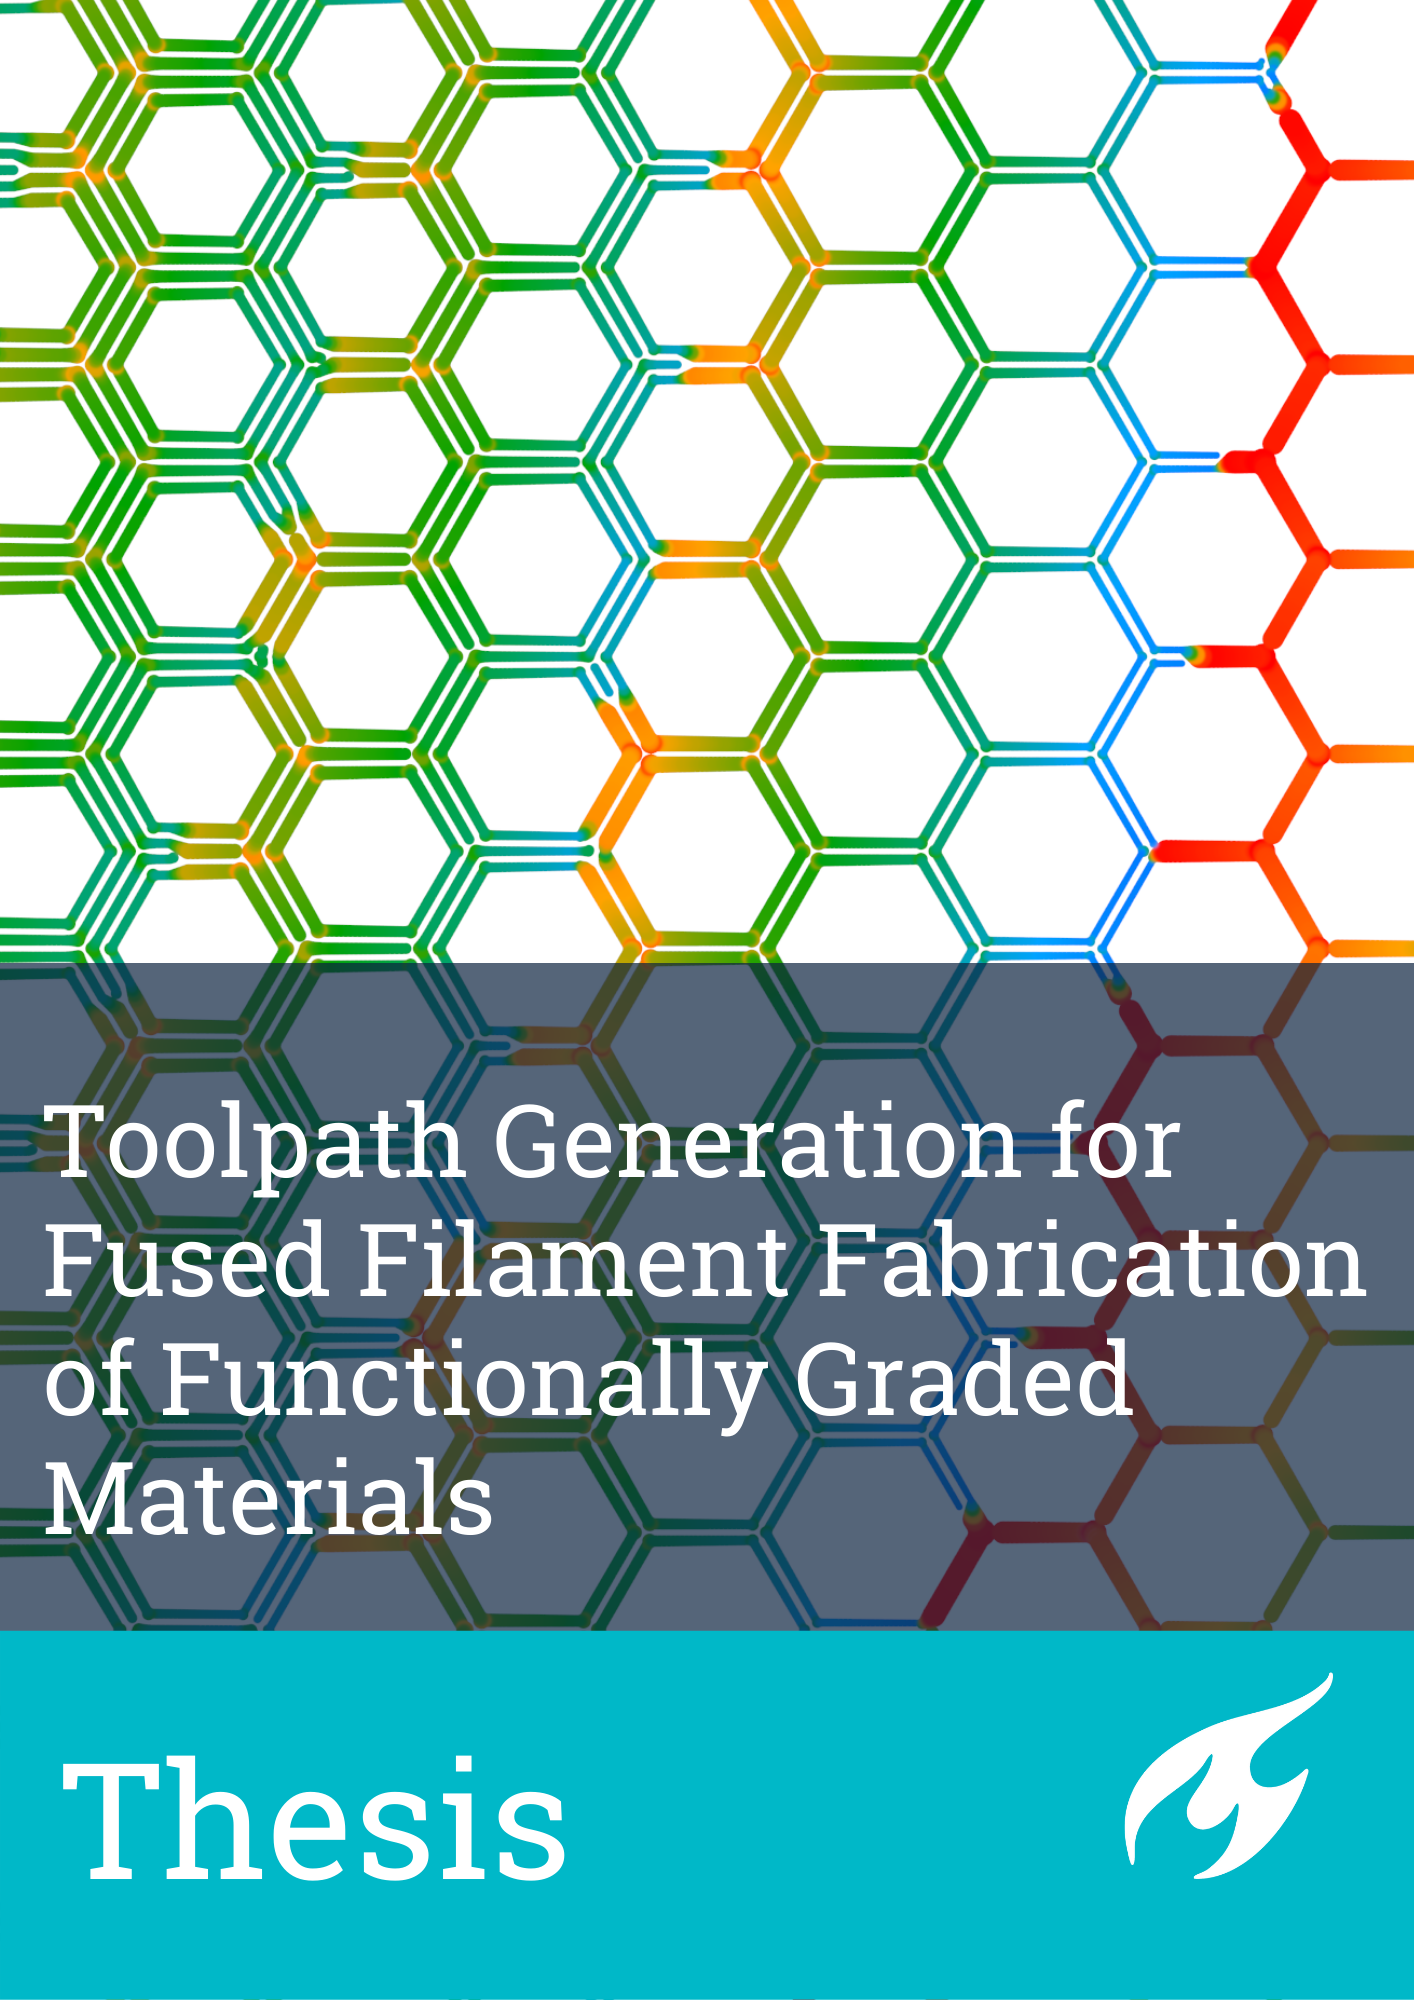 [Translate to English:] Thesis, titled "Toolpath Generation for Fused Filament Fabrication of Functionally Graded Materials"